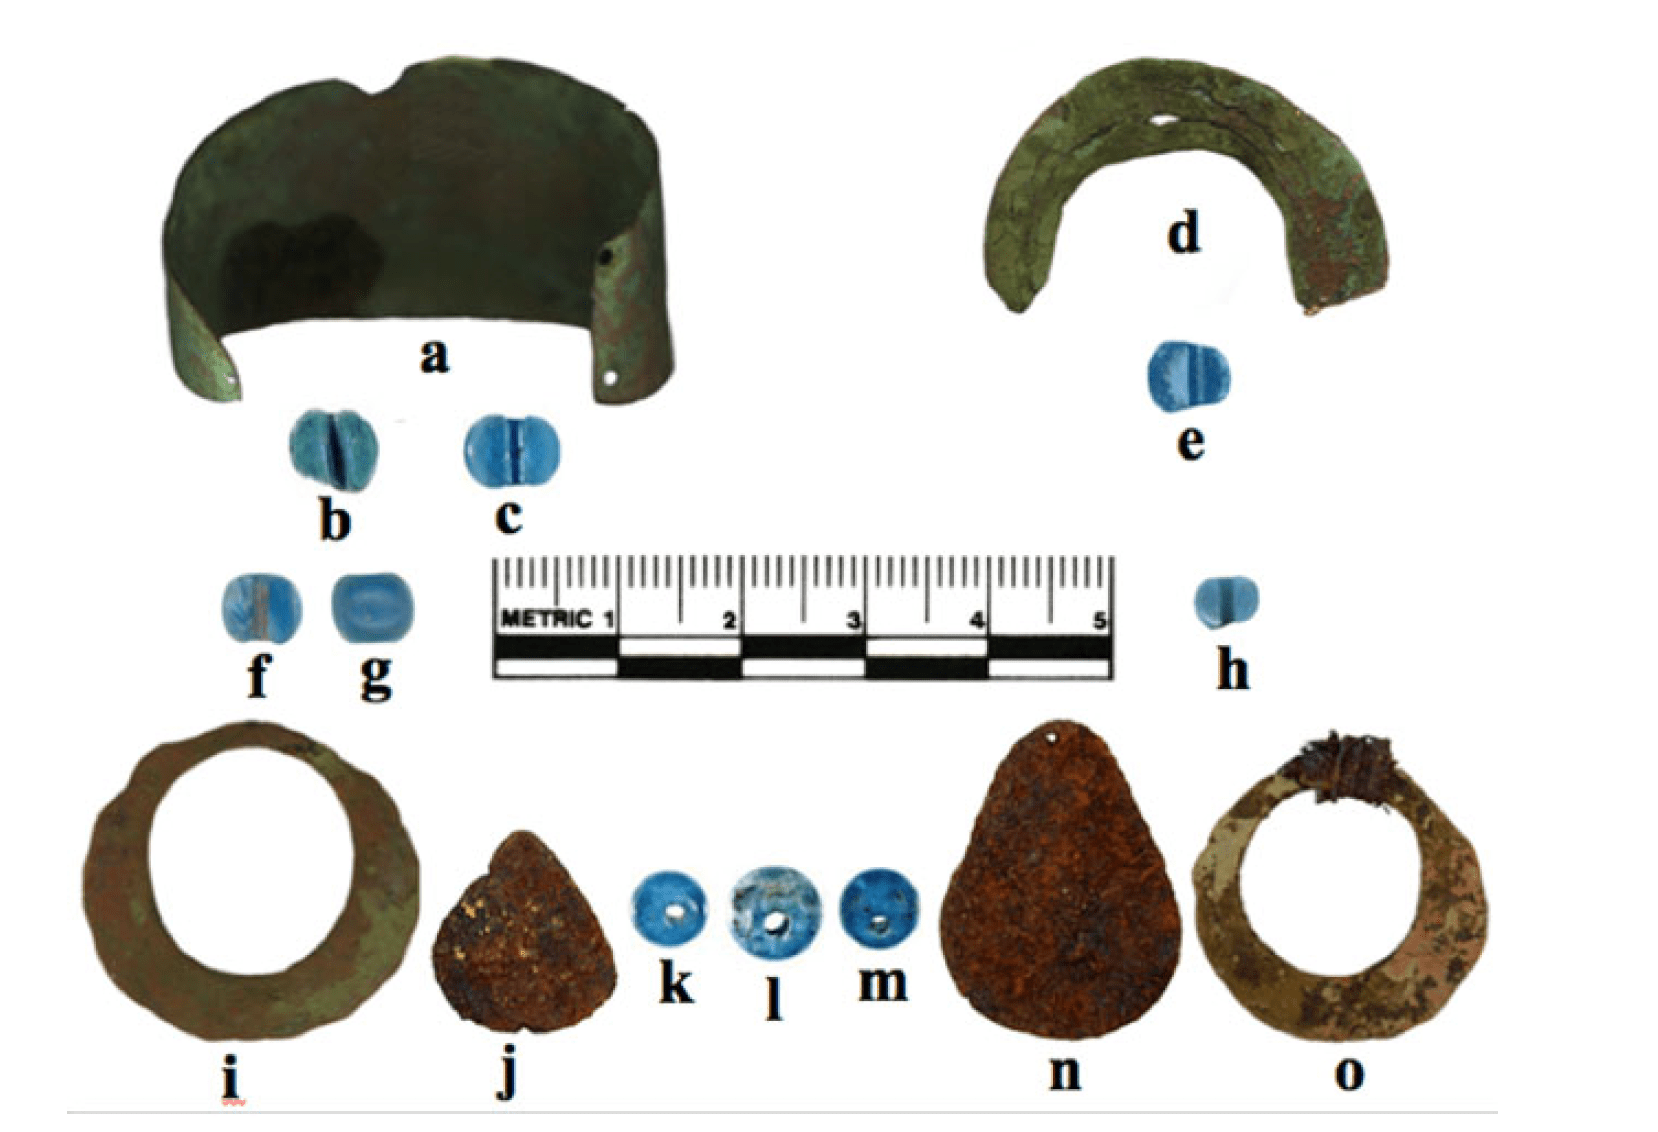 Metal artifacts and glass beads analysed in the study.  (Image: M. L. Kunz et al., 2021/American Antiquity)